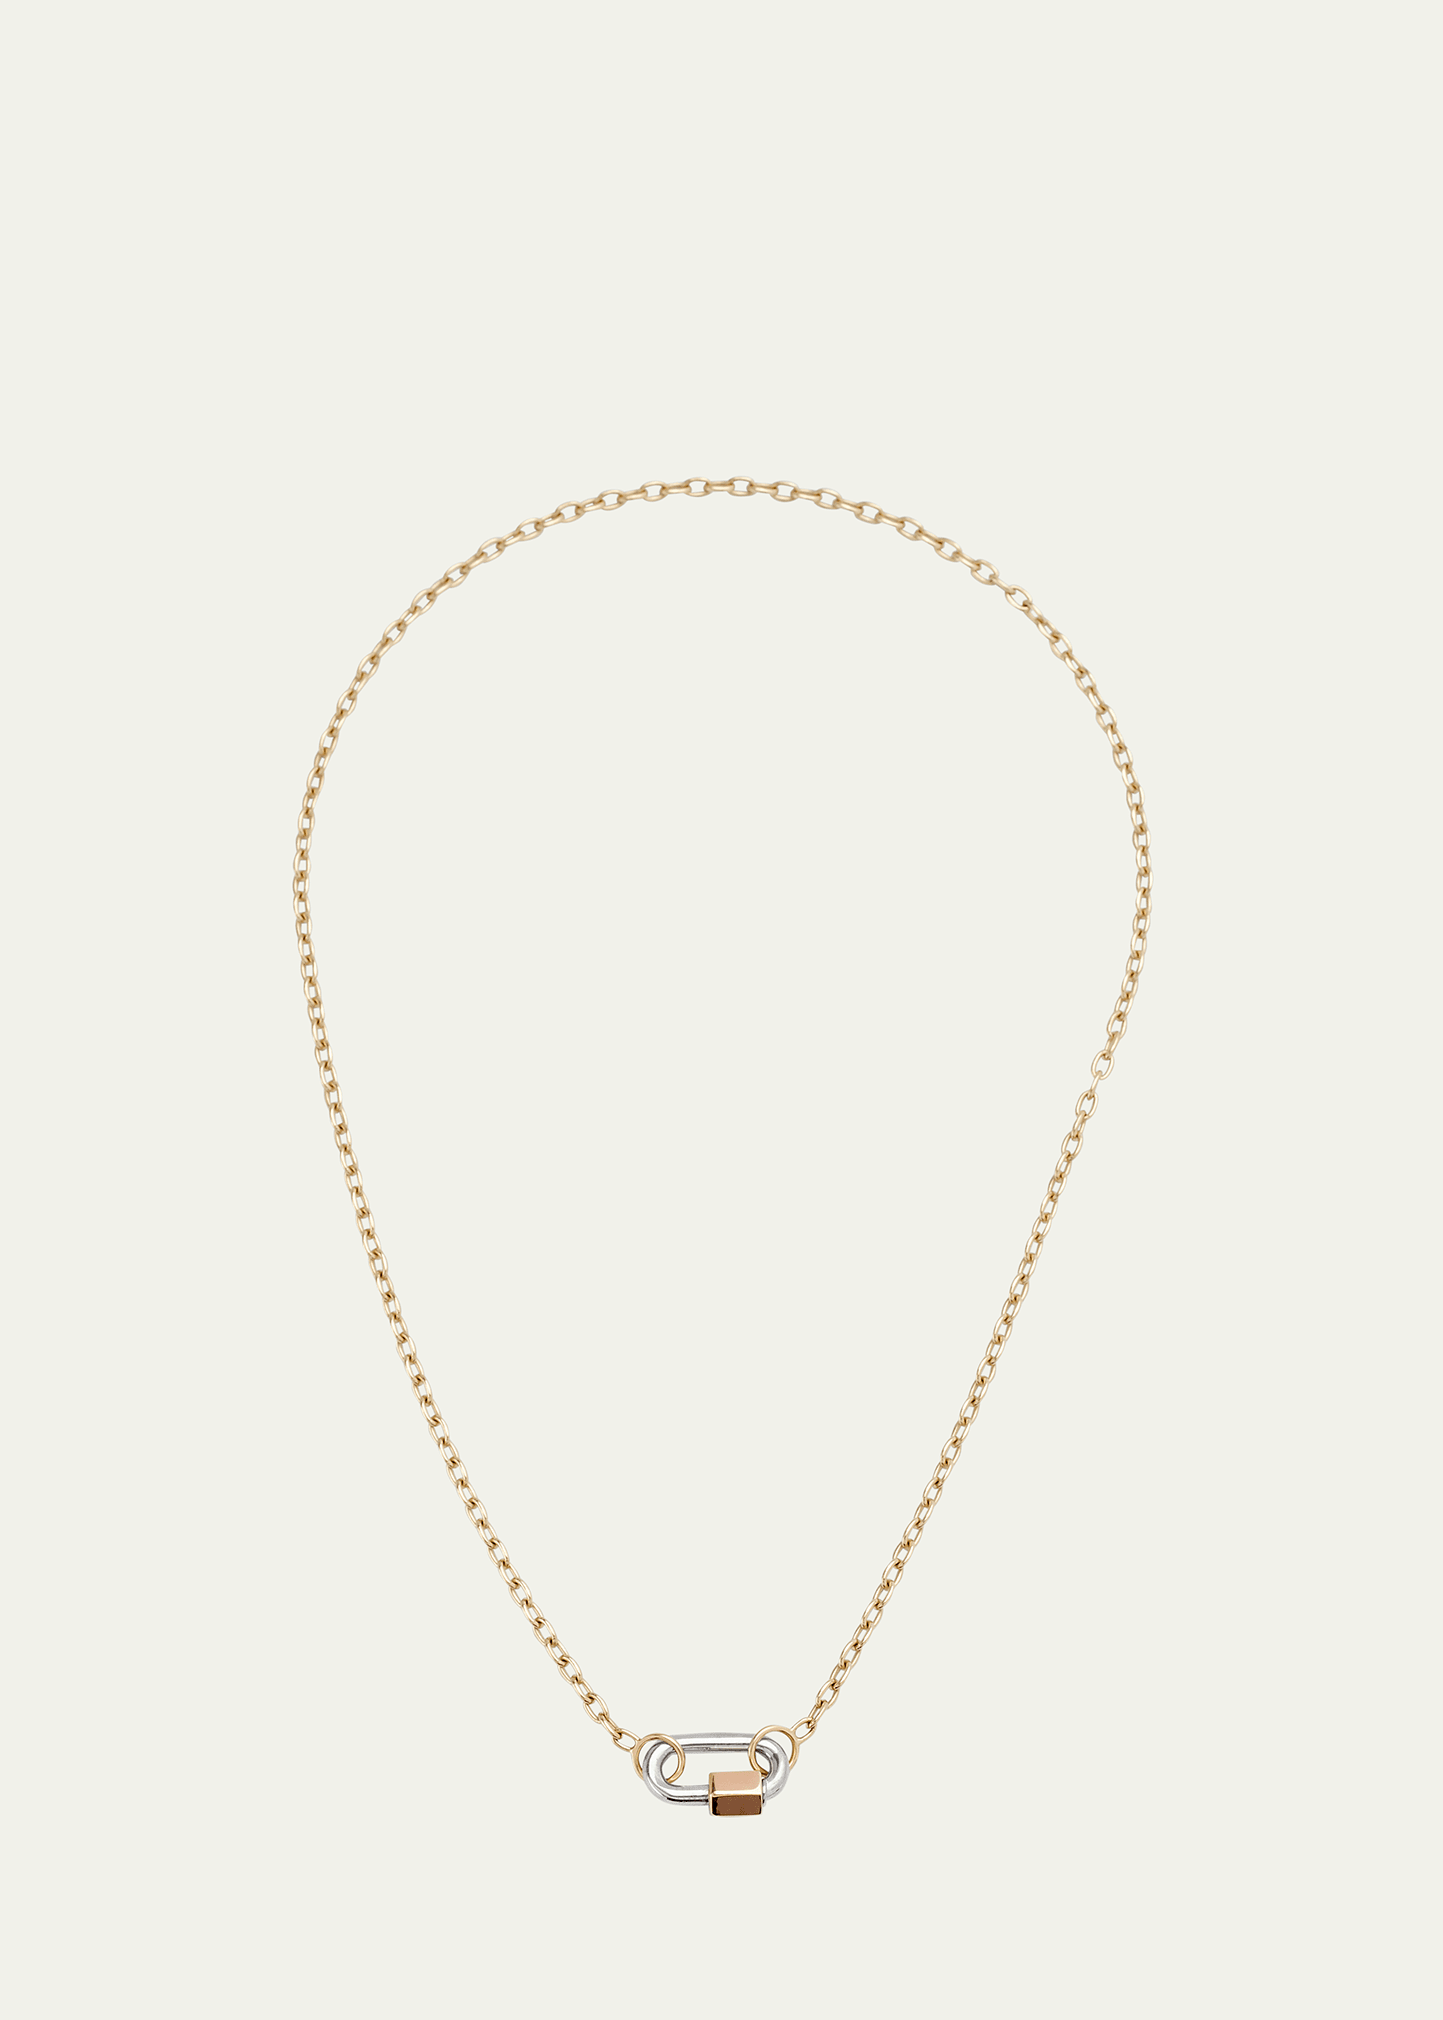 Marla Aaron 14k Pulley Chain and Lock Necklace